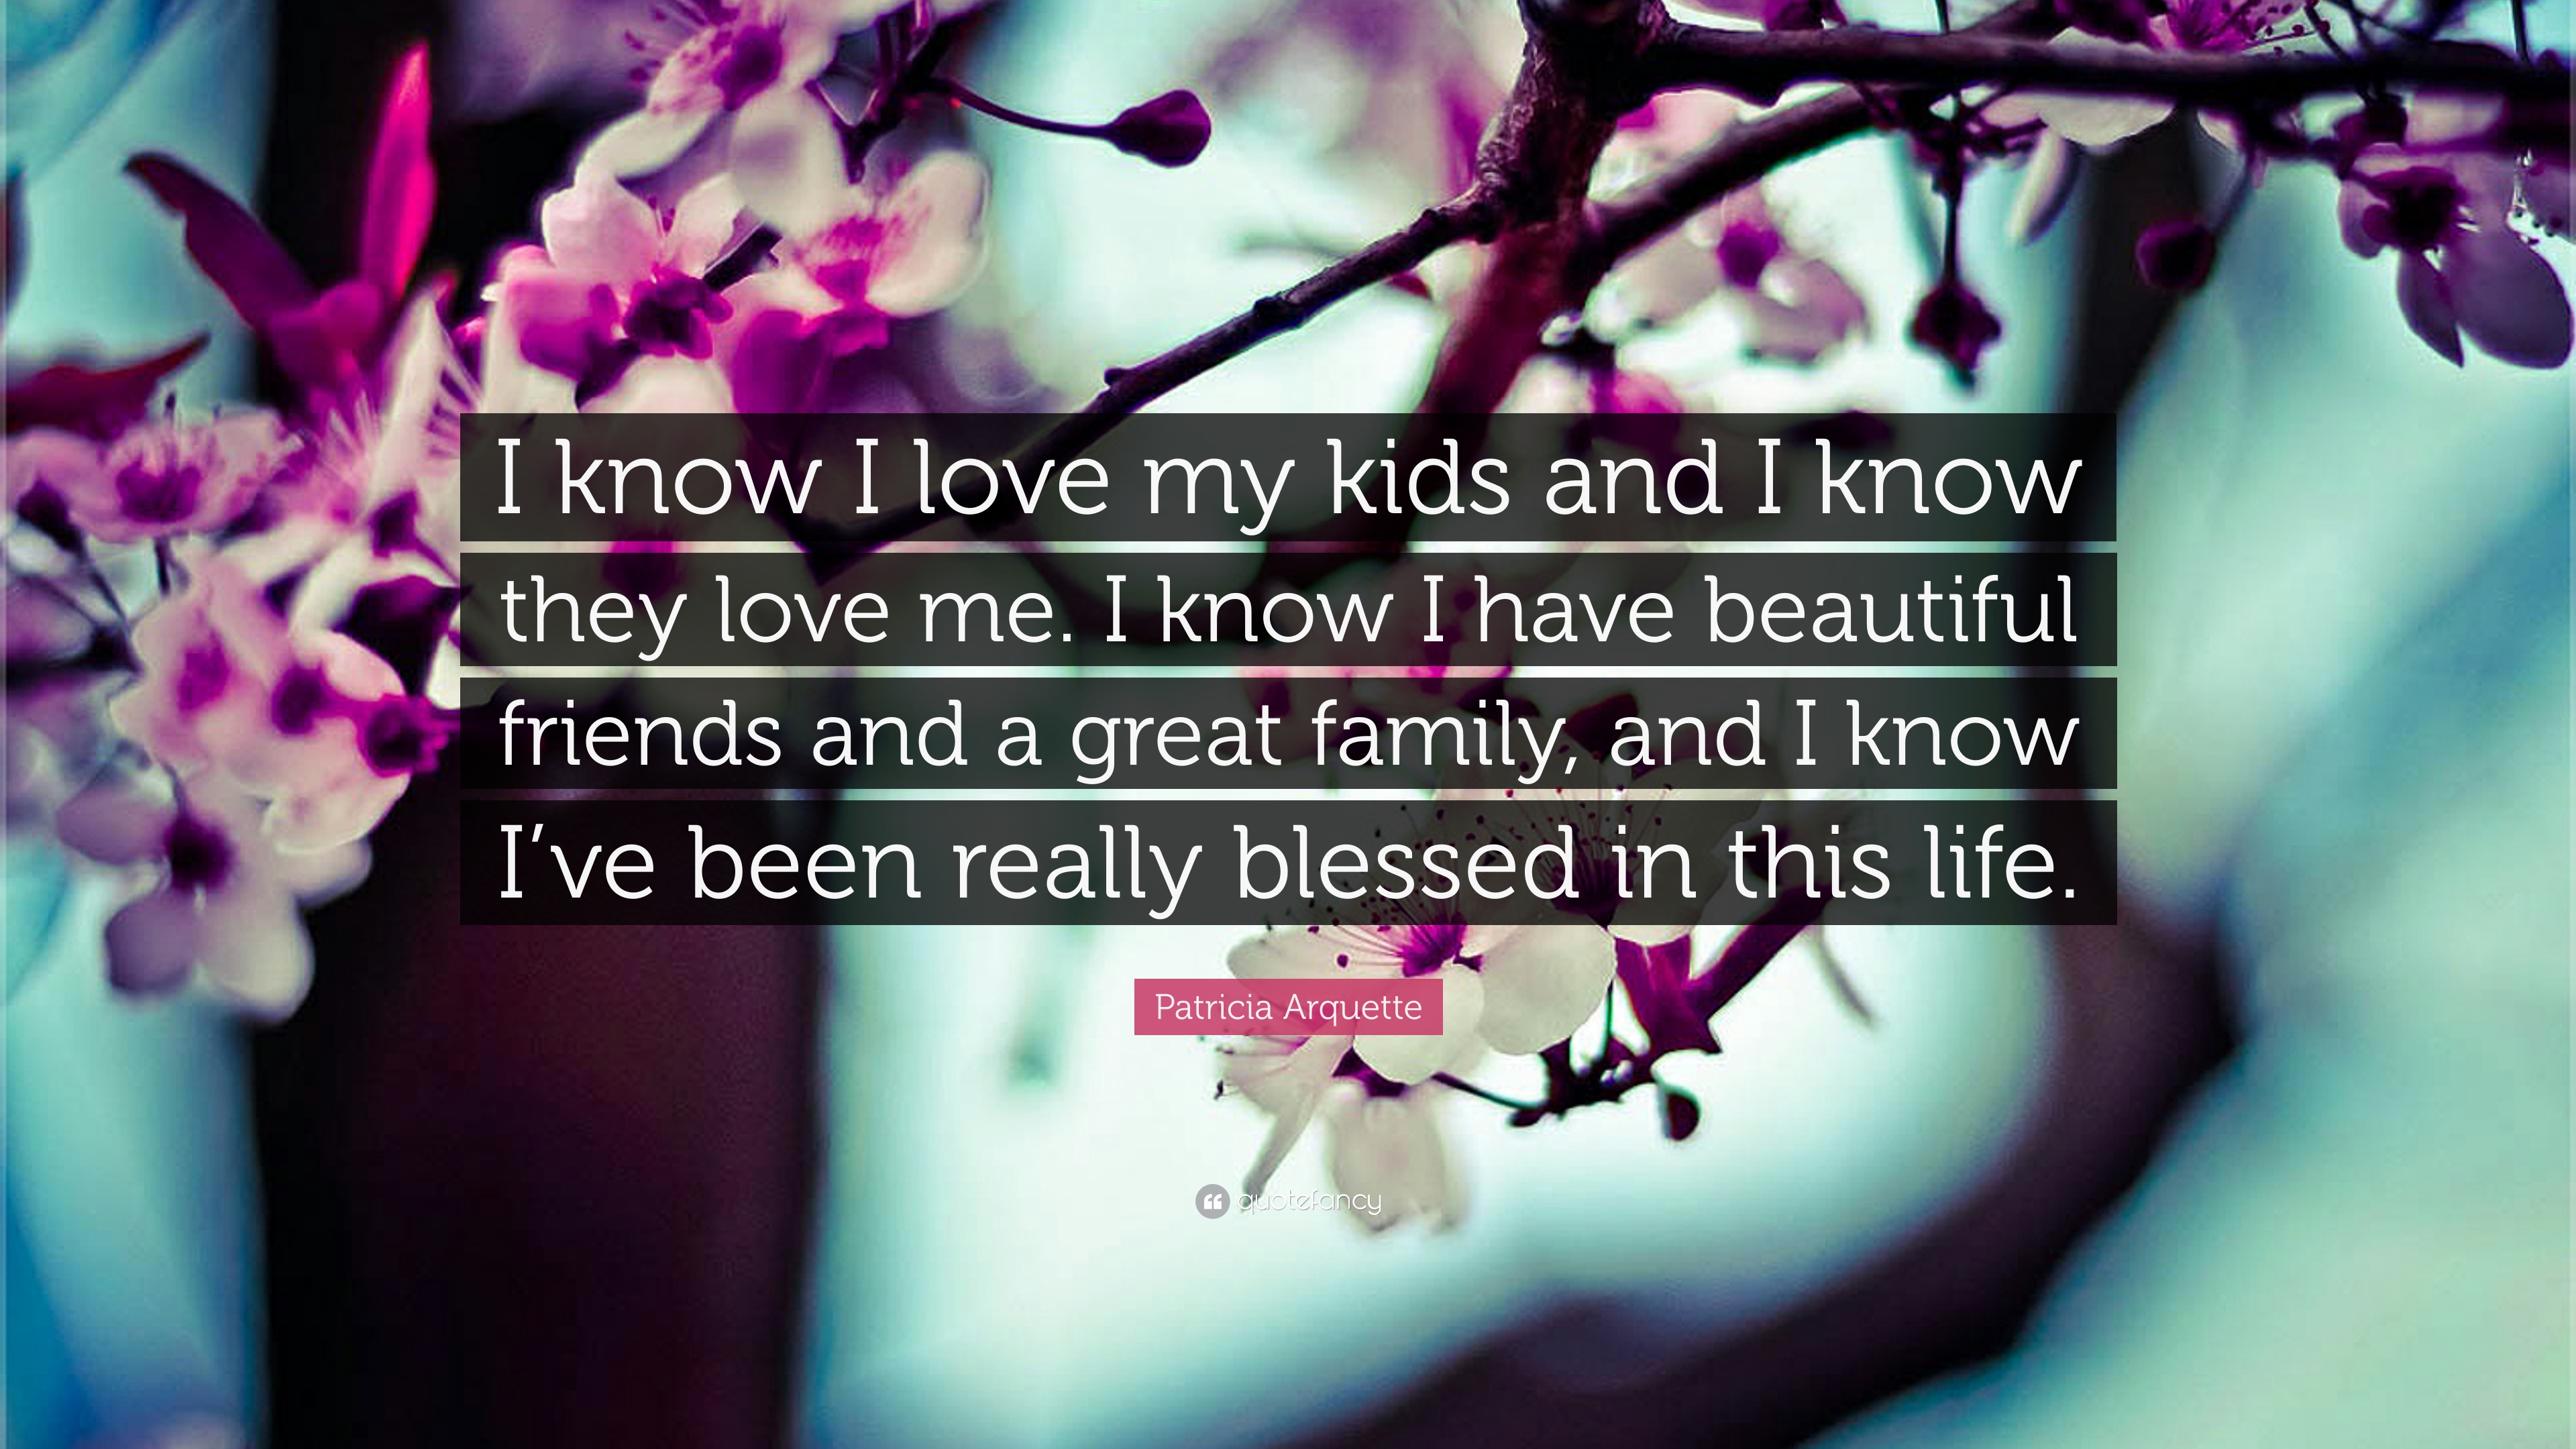 Patricia Arquette Quote: “I know I love my kids and I know they love